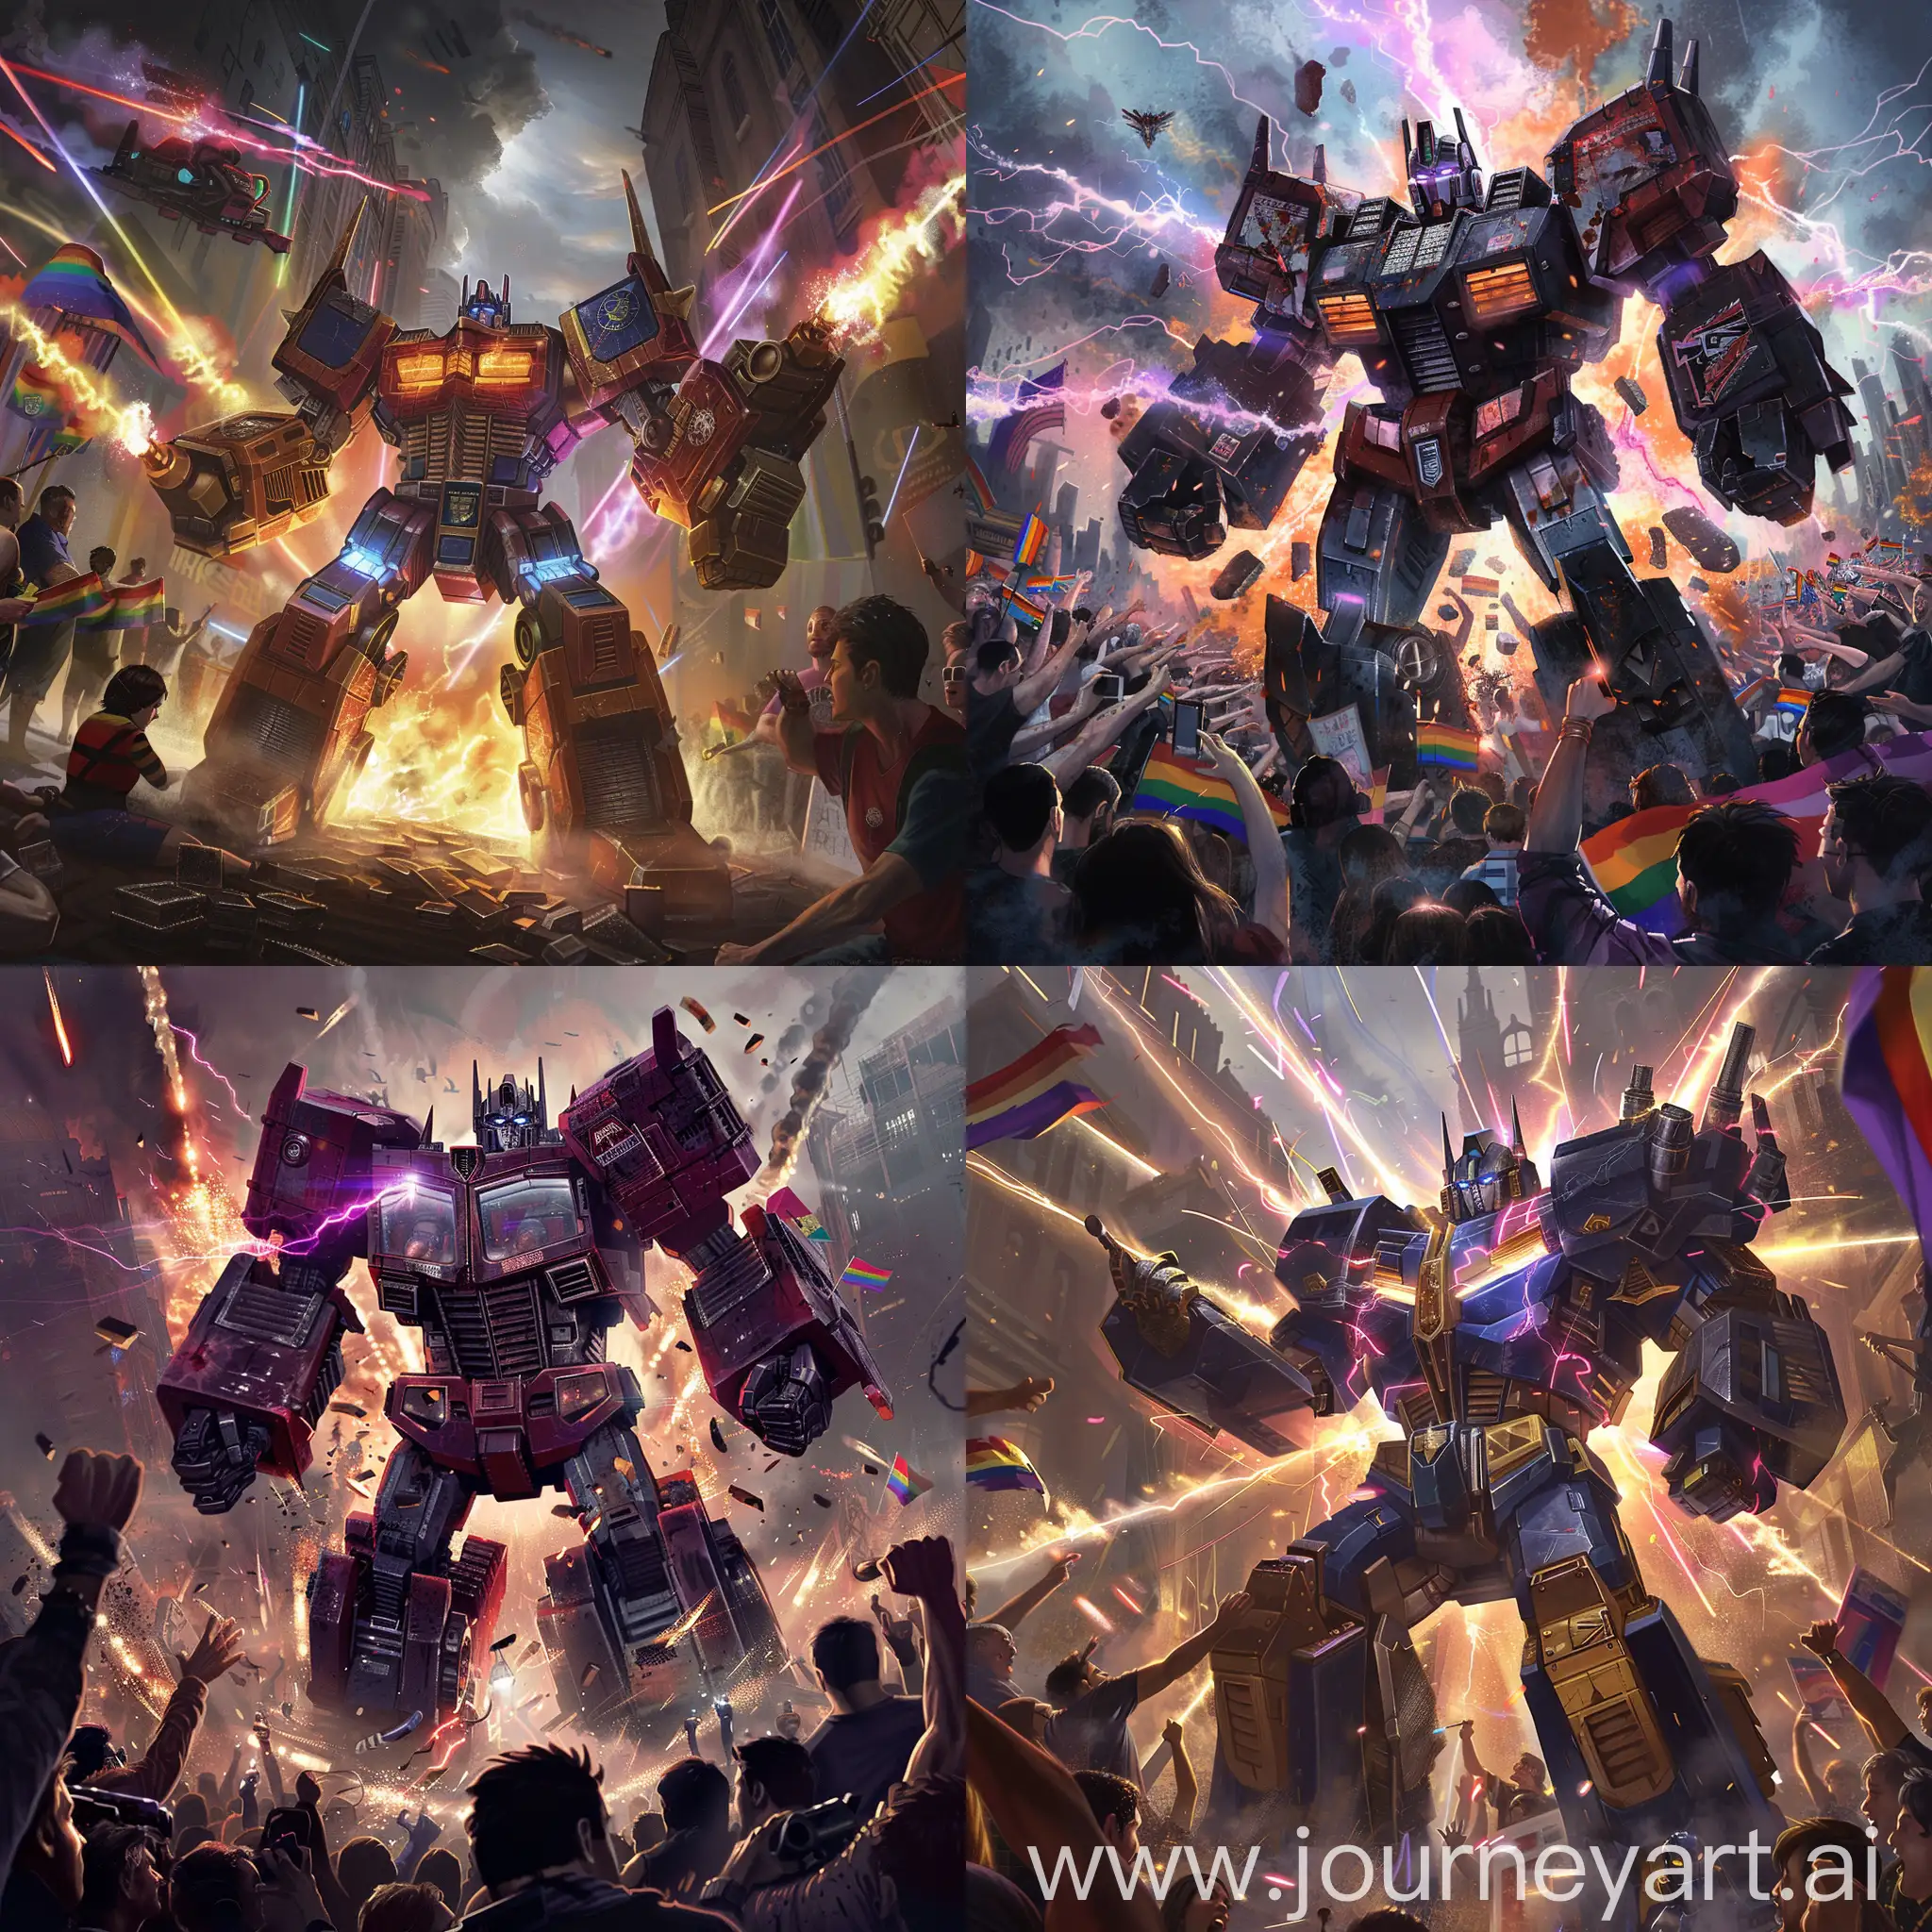 Portray the Decepticon leader Megatron in an epic battle for traditional values. In the foreground, he is dispersing the gay pride parade, demonstrating his power and determination. The background is made in dark and gloomy tones, symbolizing the conflict and drama of the scene. Megatron is depicted in his classic combat appearance, surrounded by energy discharges that emphasize his strength.